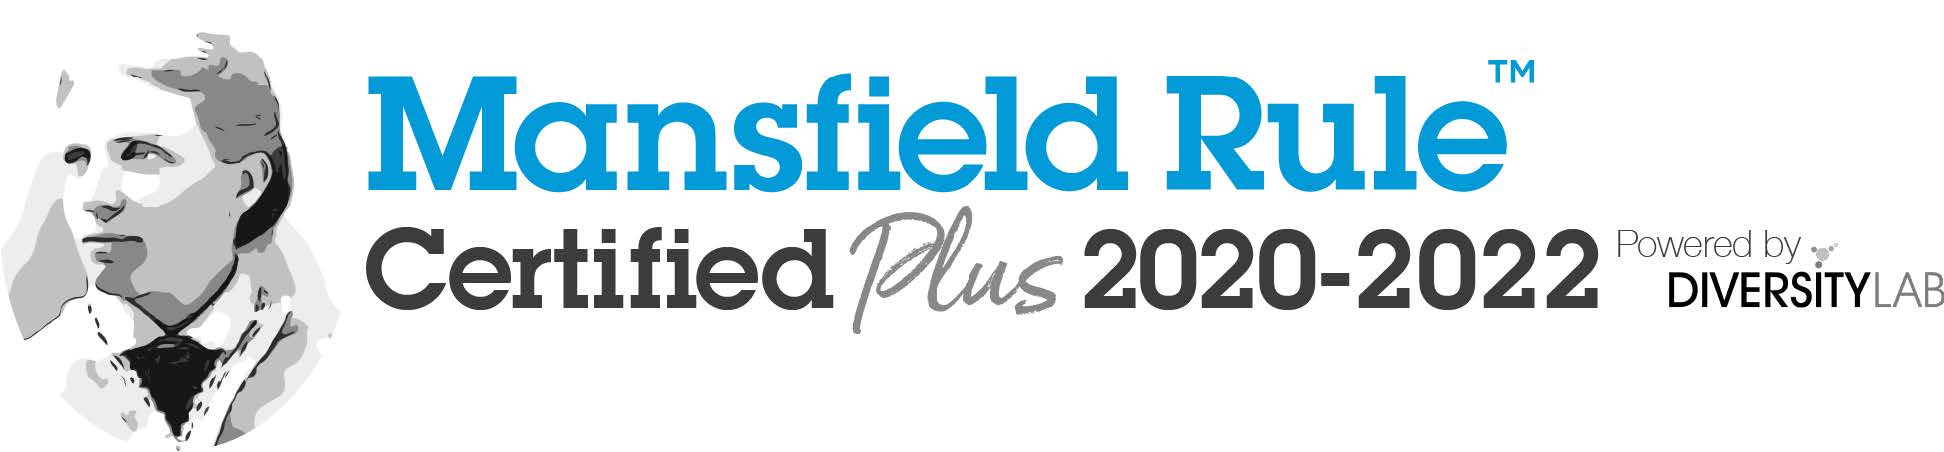 An image of Arabella Mansfield and the text "Mansfield Certified Plus 2020-2022"